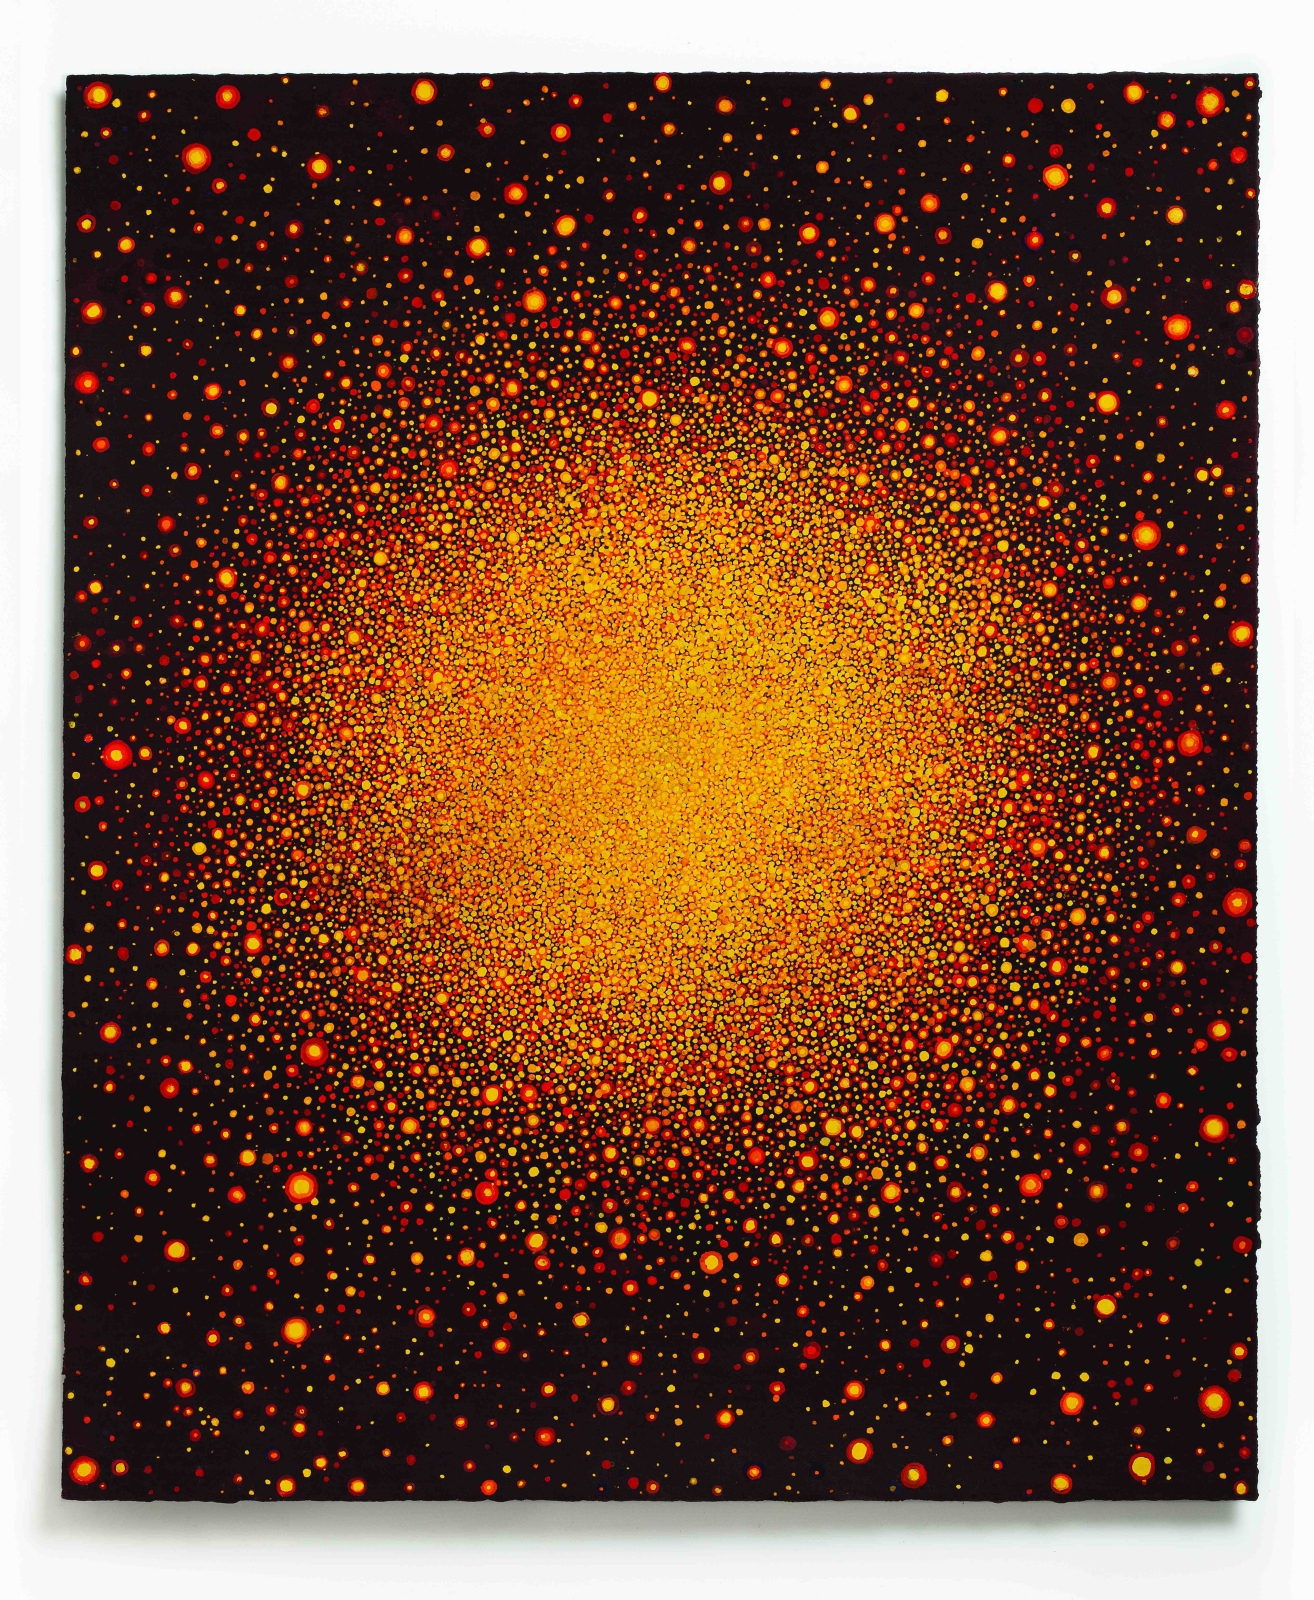 Karen Arm
Untitled (Yellow Red Sun on Black Red), 2014
watercolor on paper
18 x 15 in.
45.72 x 38.1 cm